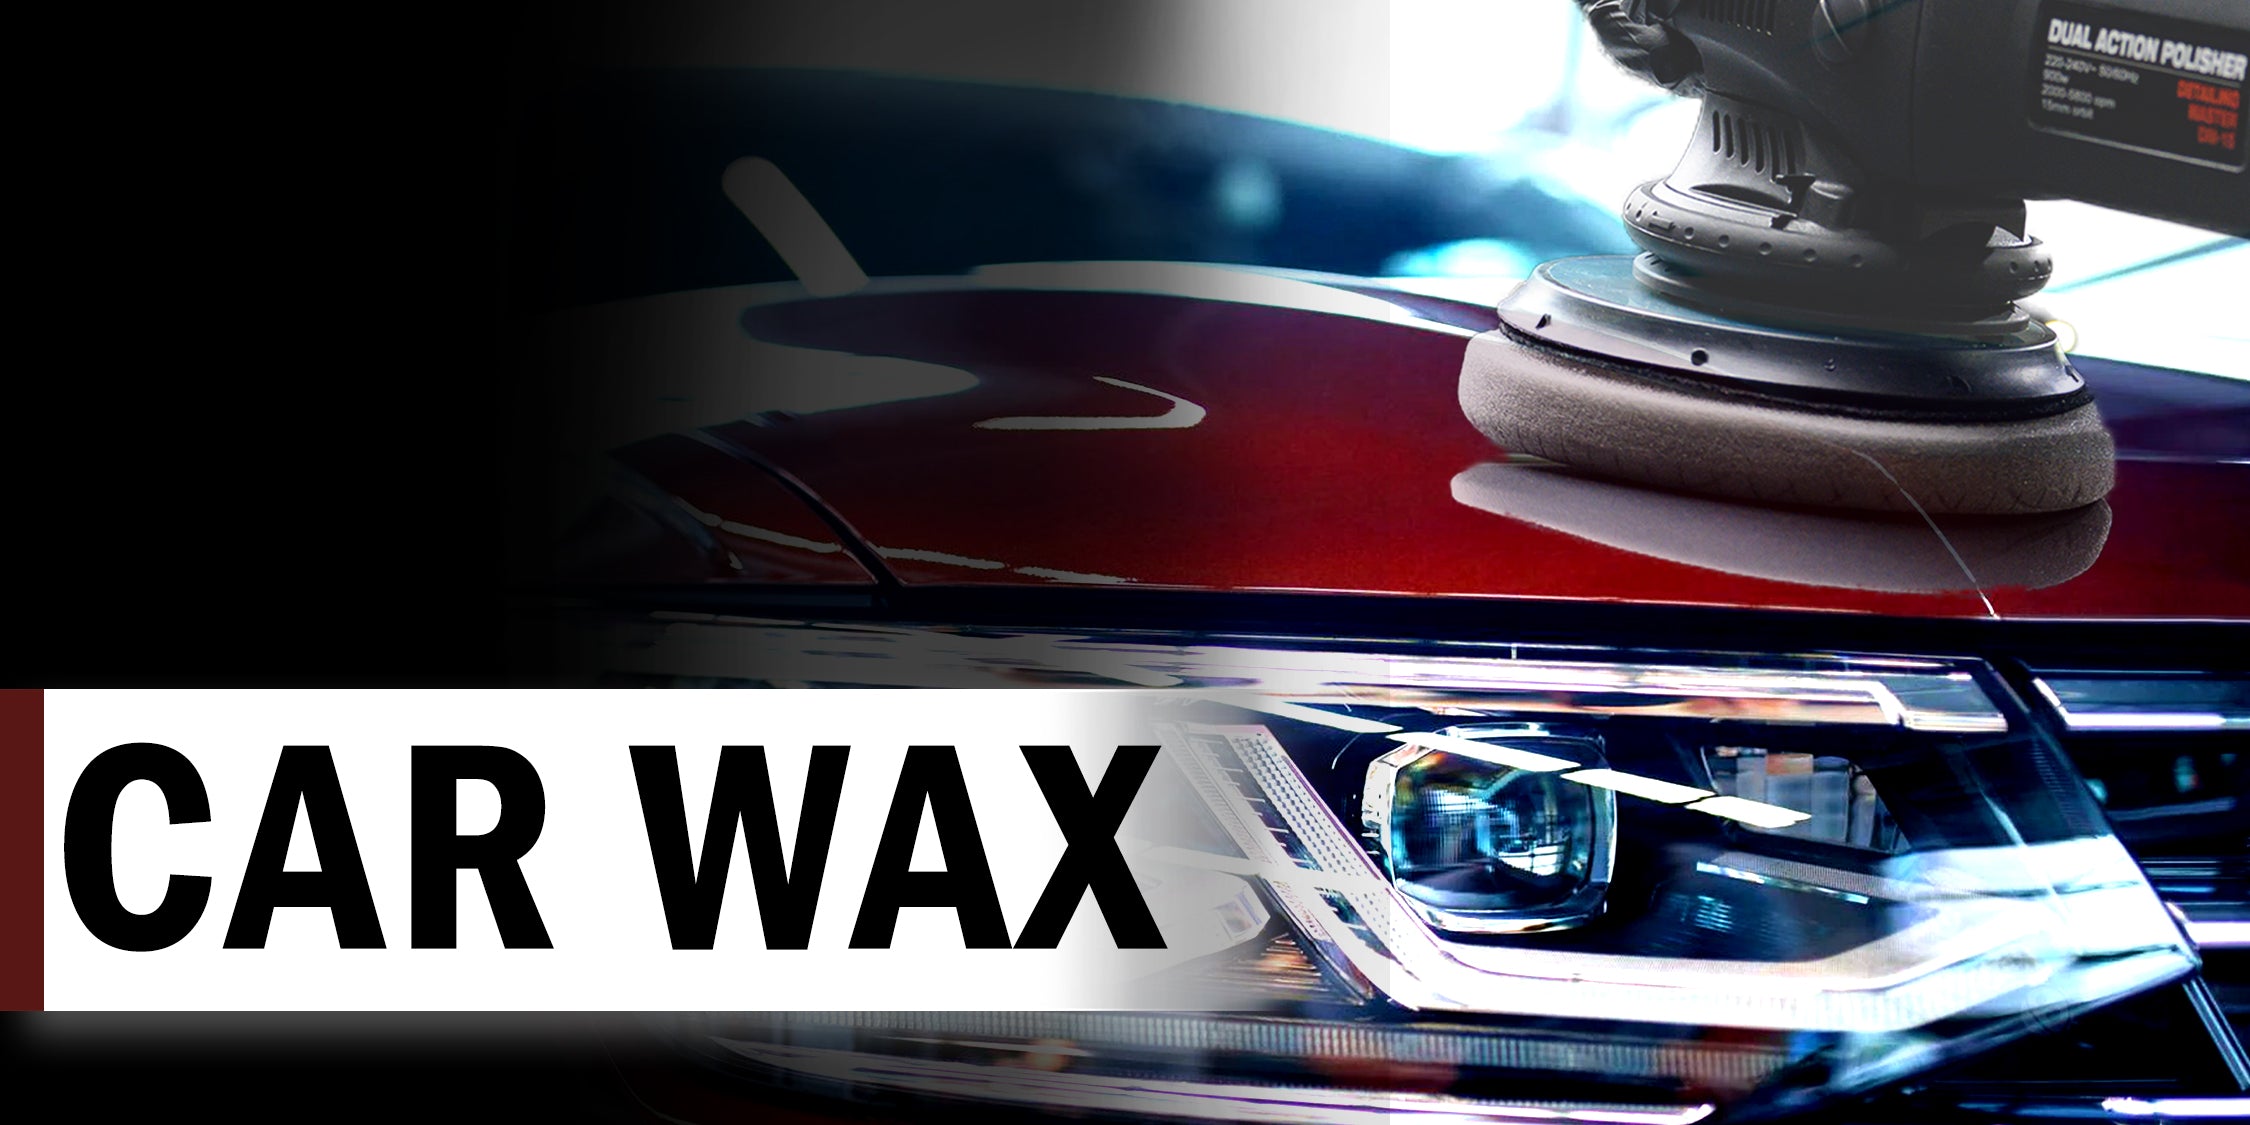 What is the difference between a wax and a polish?